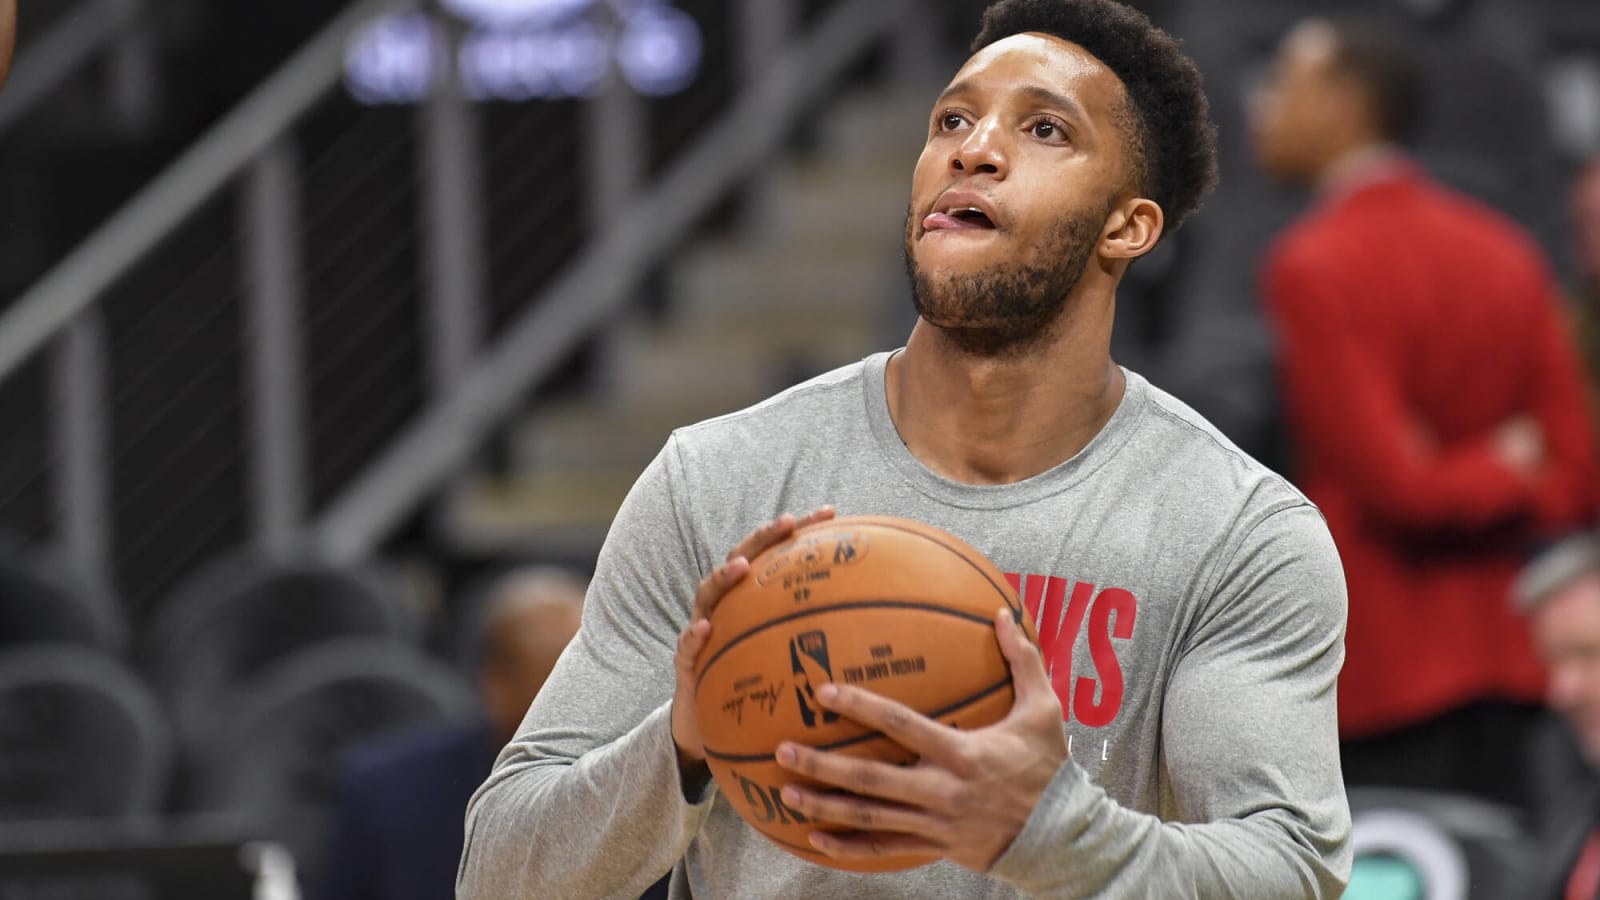 Evan Turner talks about how NBA games are rigged